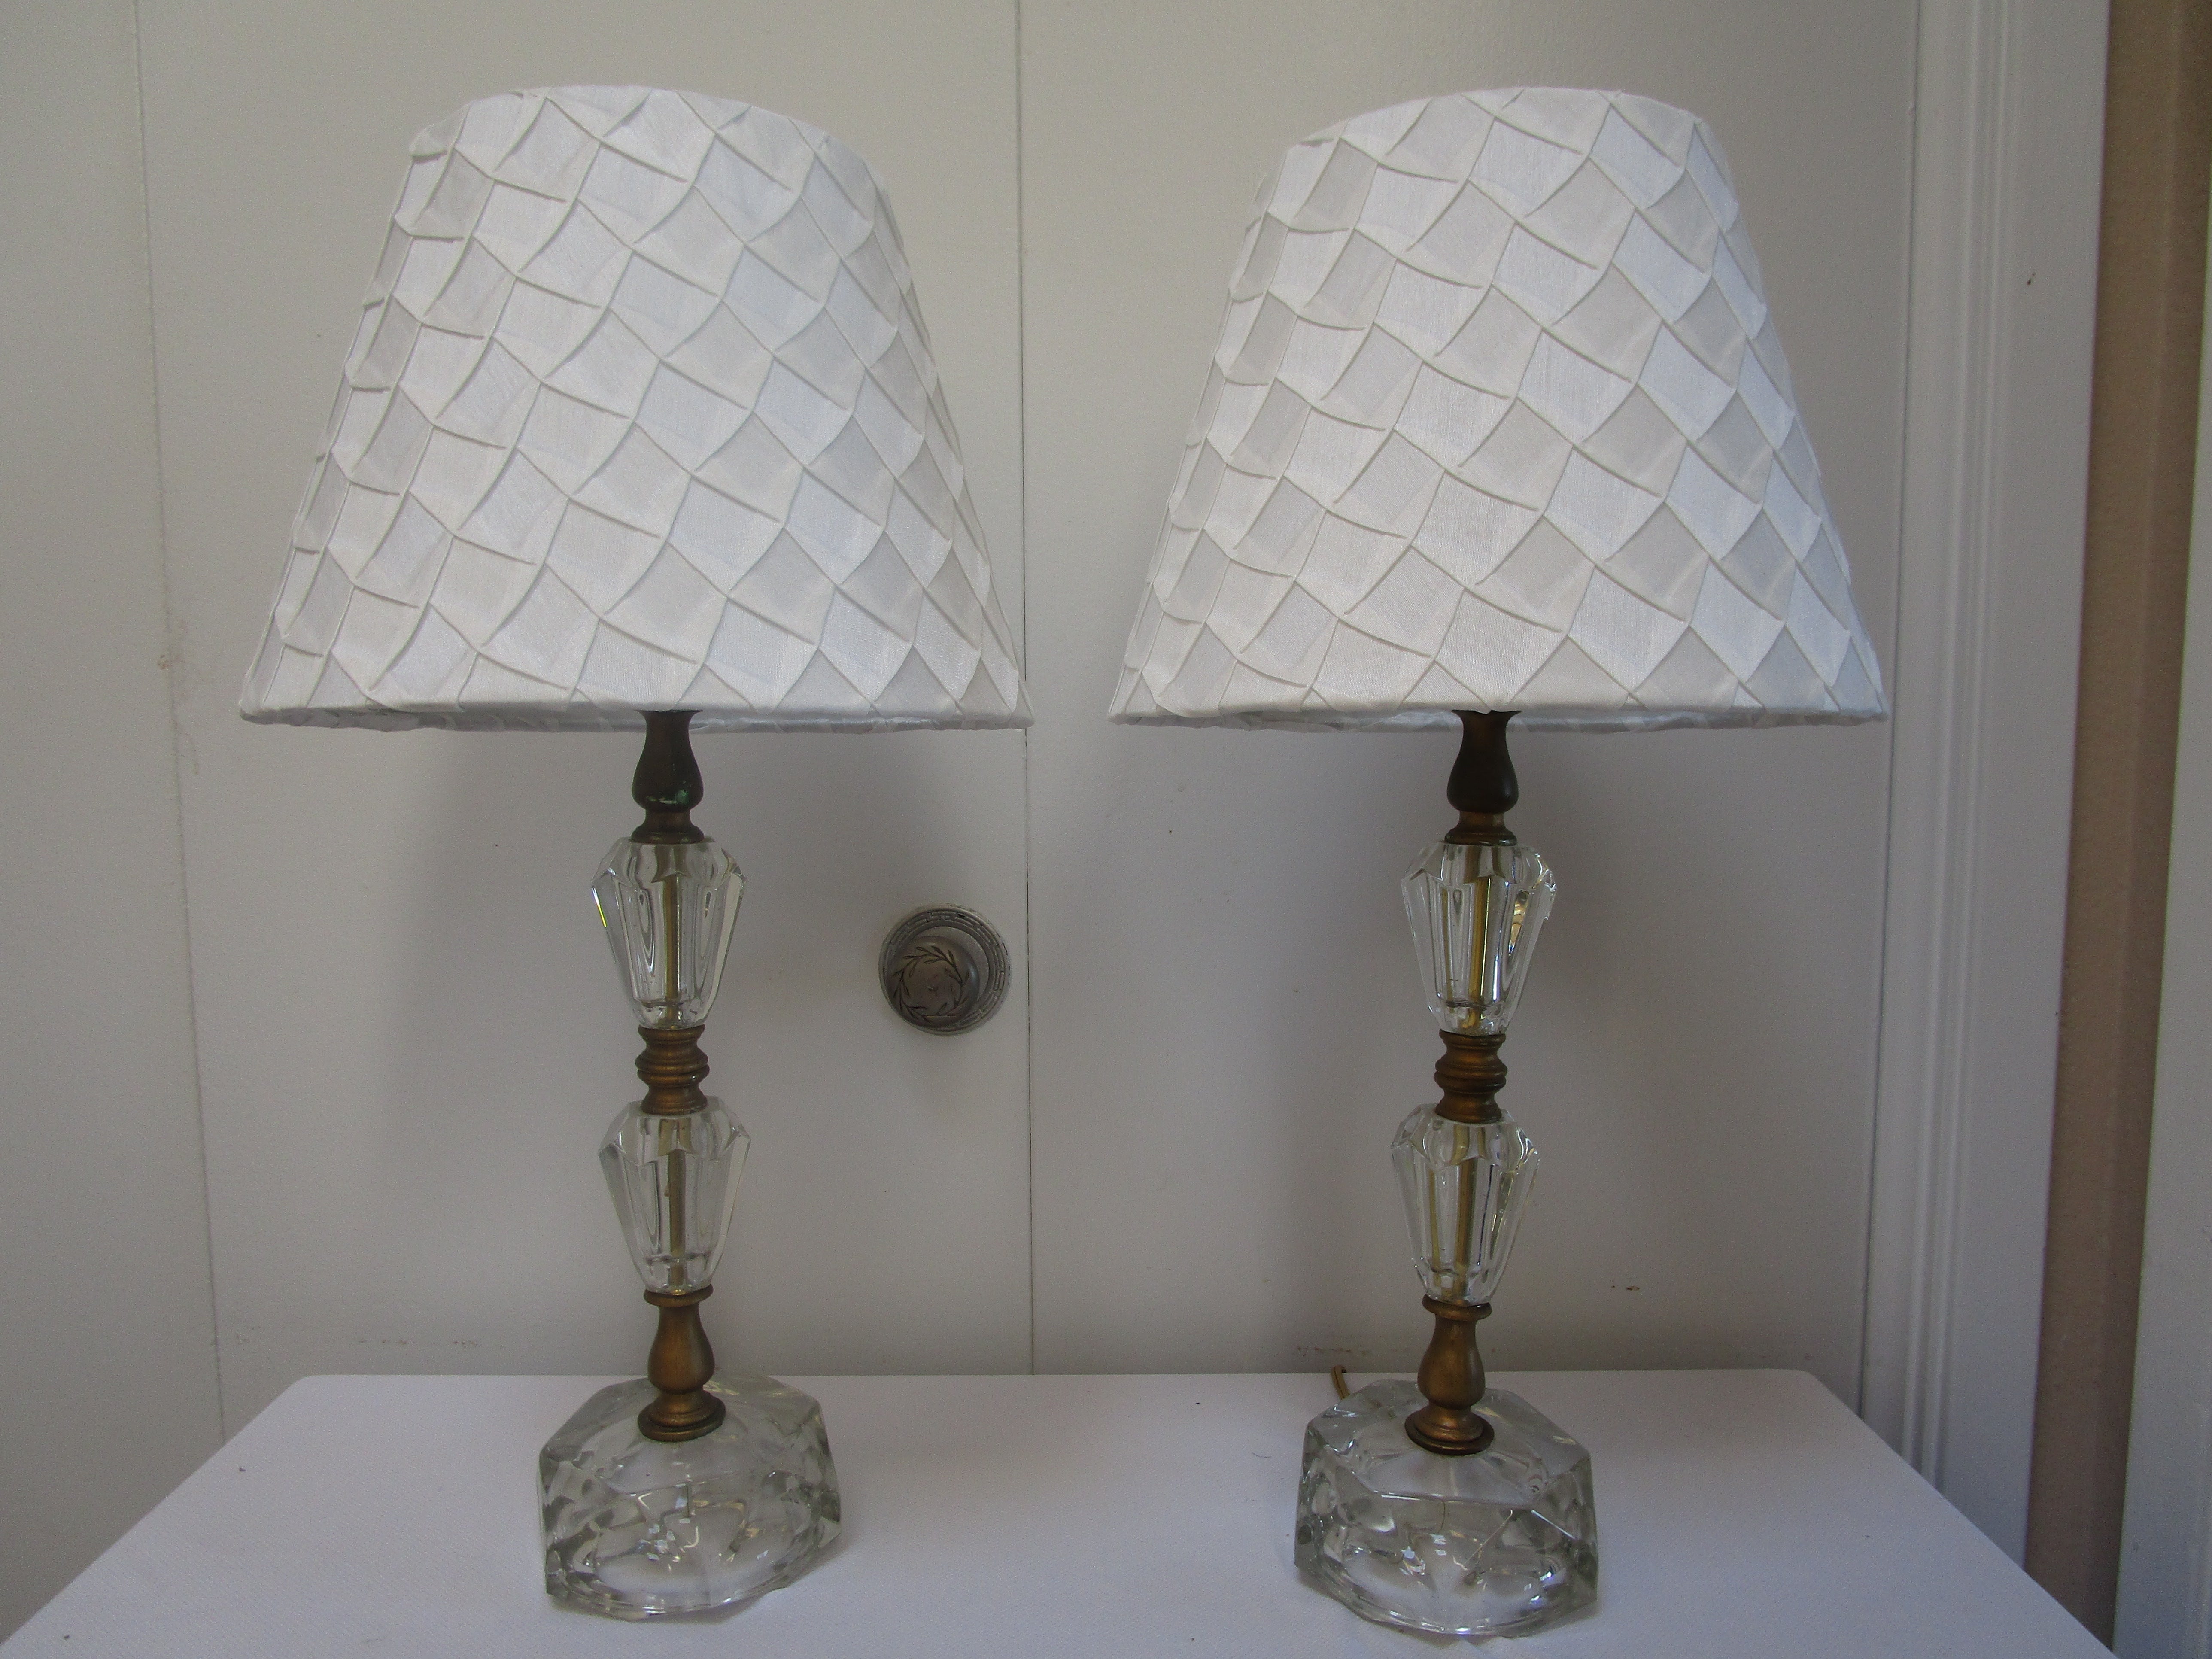 Beautiful art deco touches to faceted, polished crystal glass pair of table lamps makes for statement lighting. 
These are the most alluring table lamps for a console table or a bedroom. The geometric facets continue to the base and give the lamps